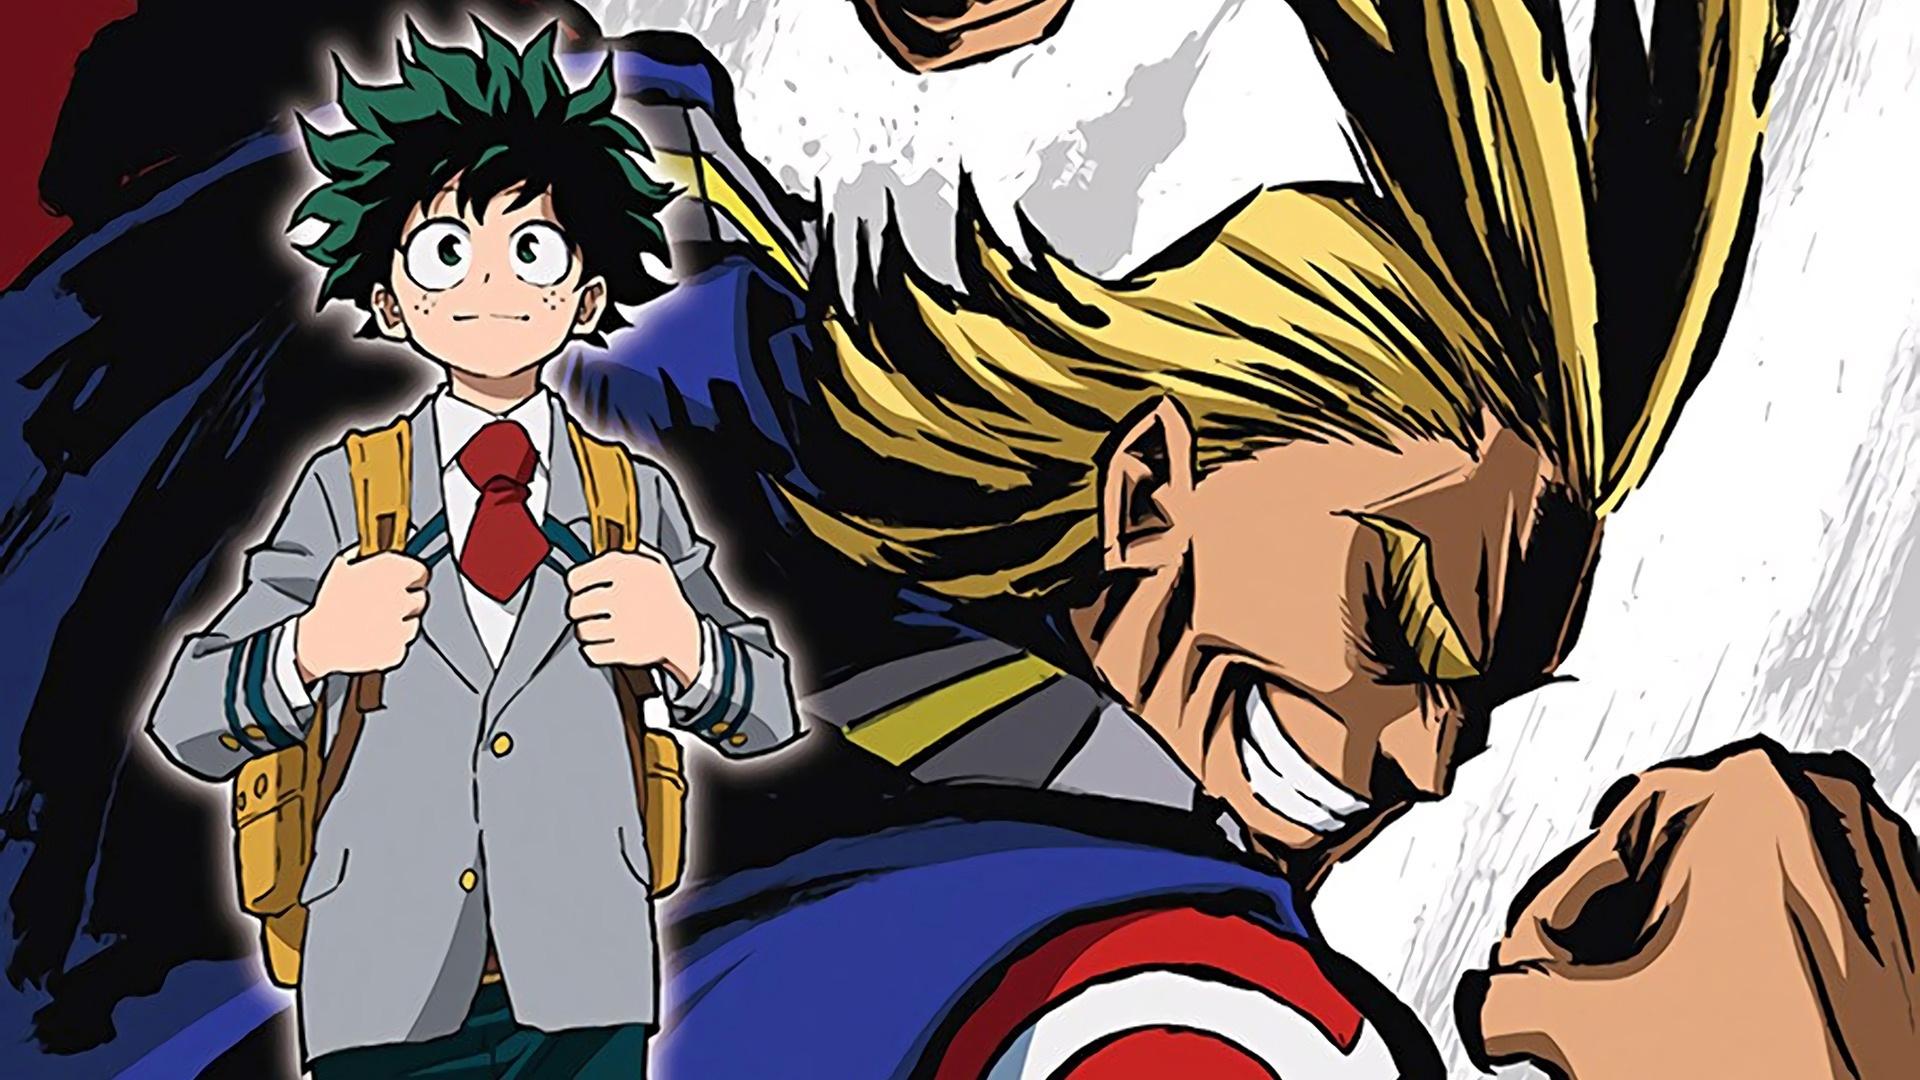 1920 x 1080 · jpeg - 3 Lessons from My Hero Academia That Encourage Me to 